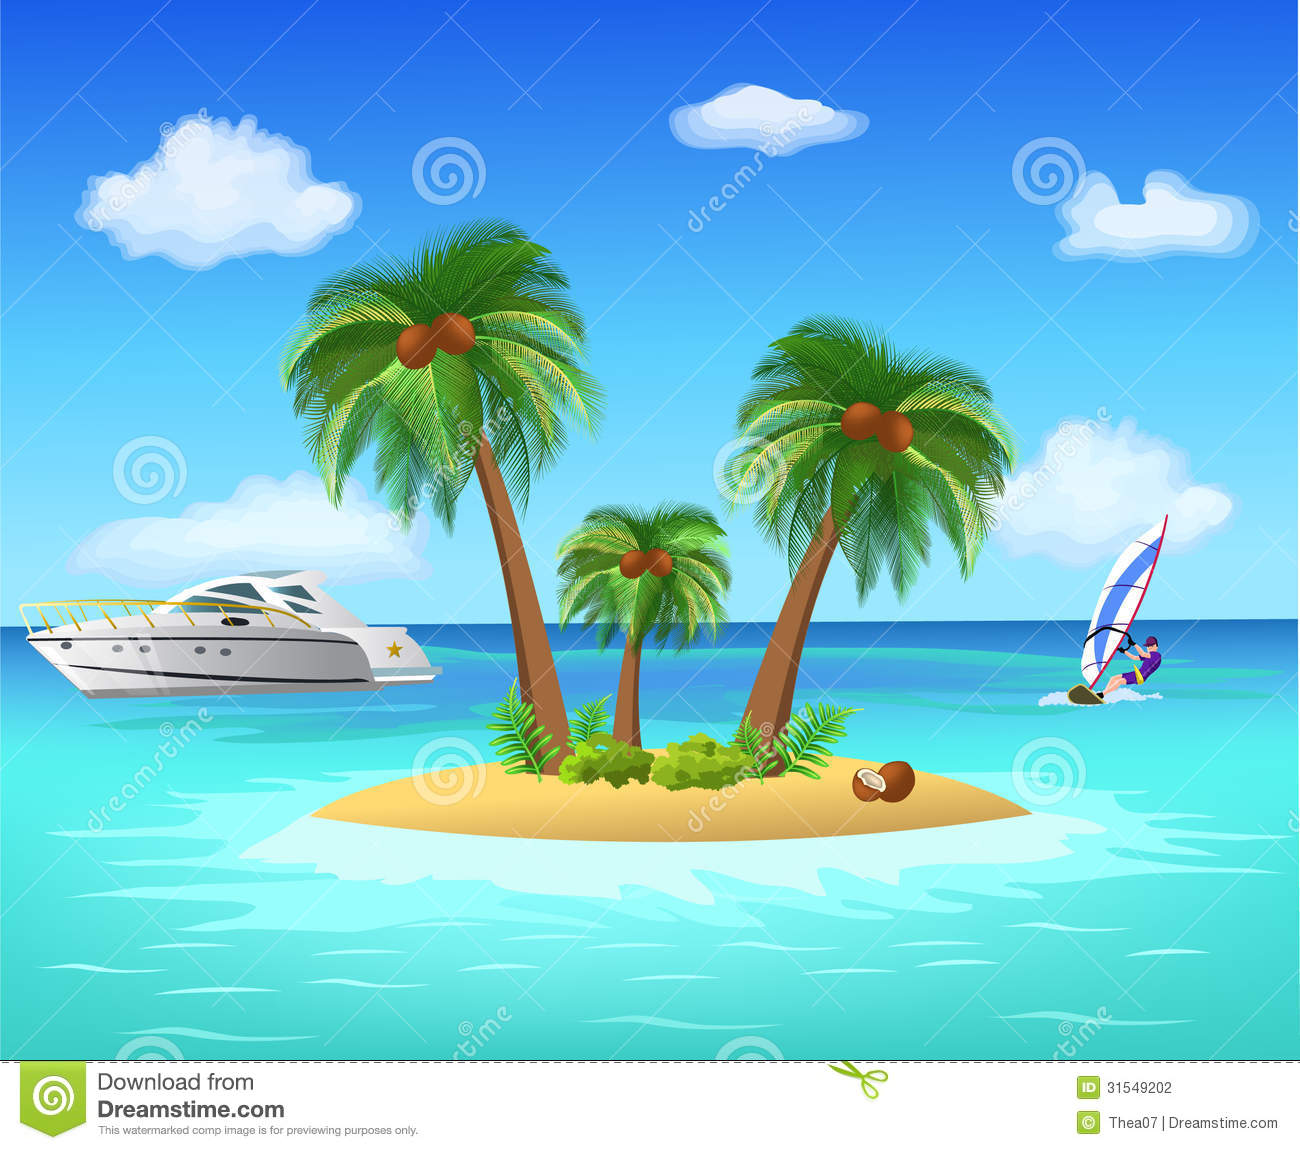 Illustration Of A Small Tropical Island In The Middle Of The Ocean